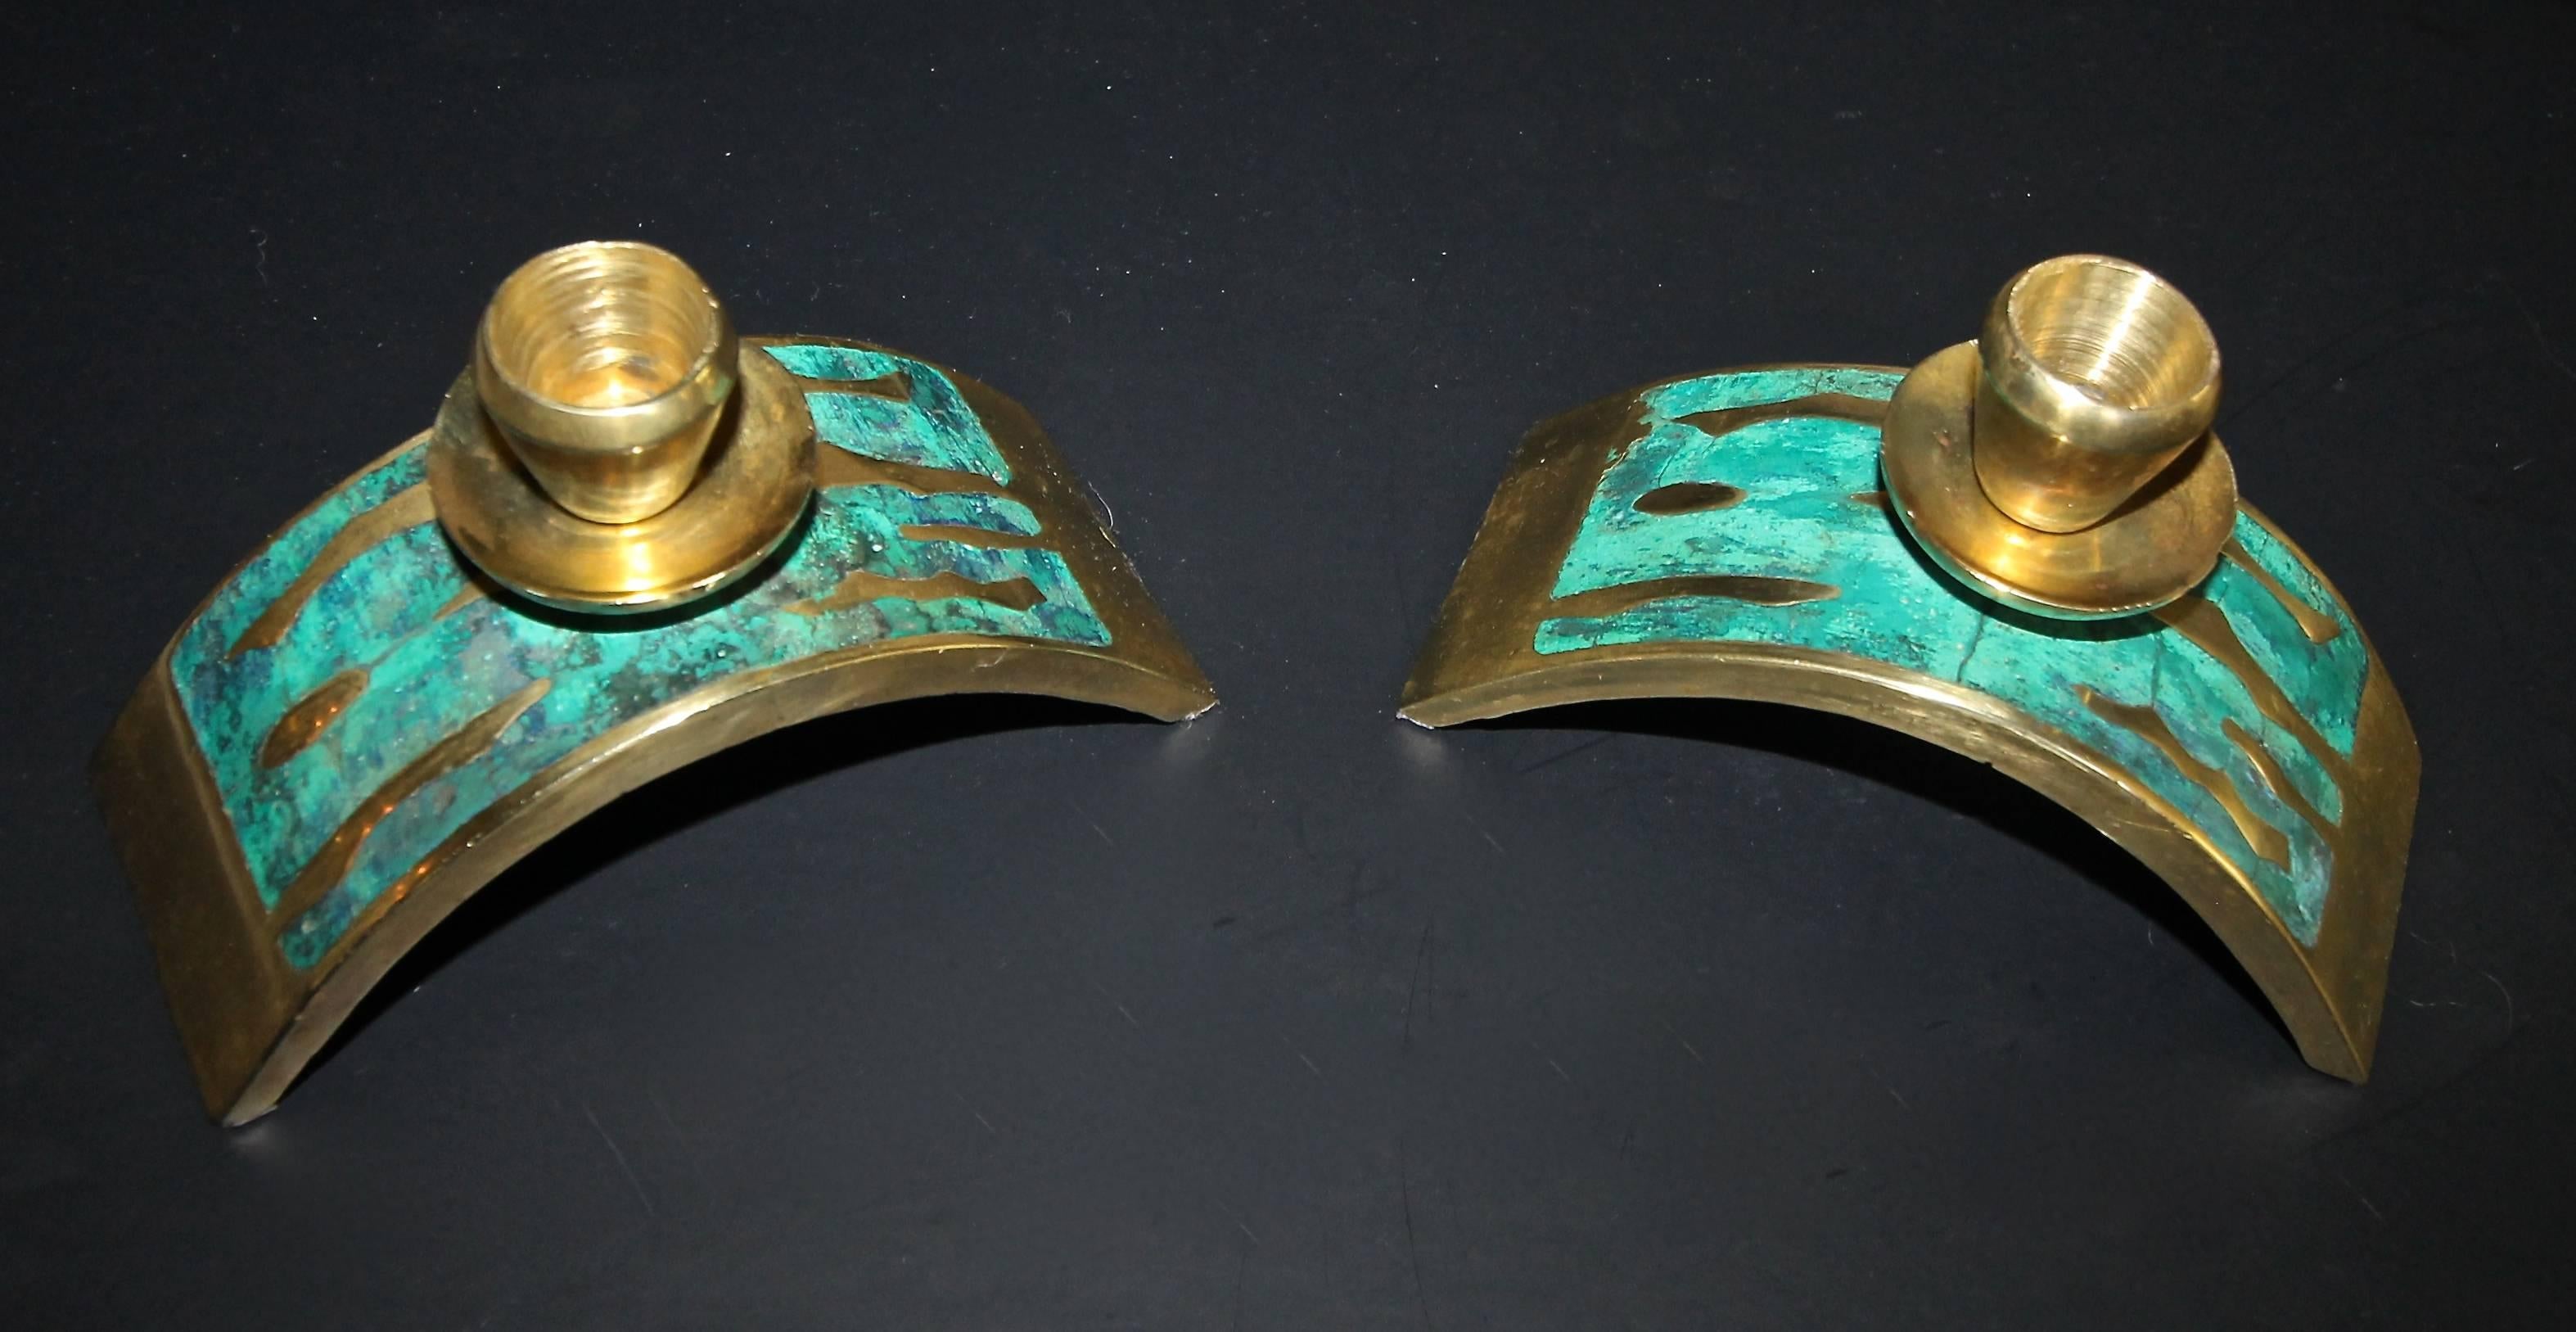 A rare pair of Pepe Mendoza modernist arched candlesticks or candle holders. Heavy solid cast brass construction with inset turquoise colored composite stone accents. Lightly impressed oval stamp to underside of both pieces.

Size of each